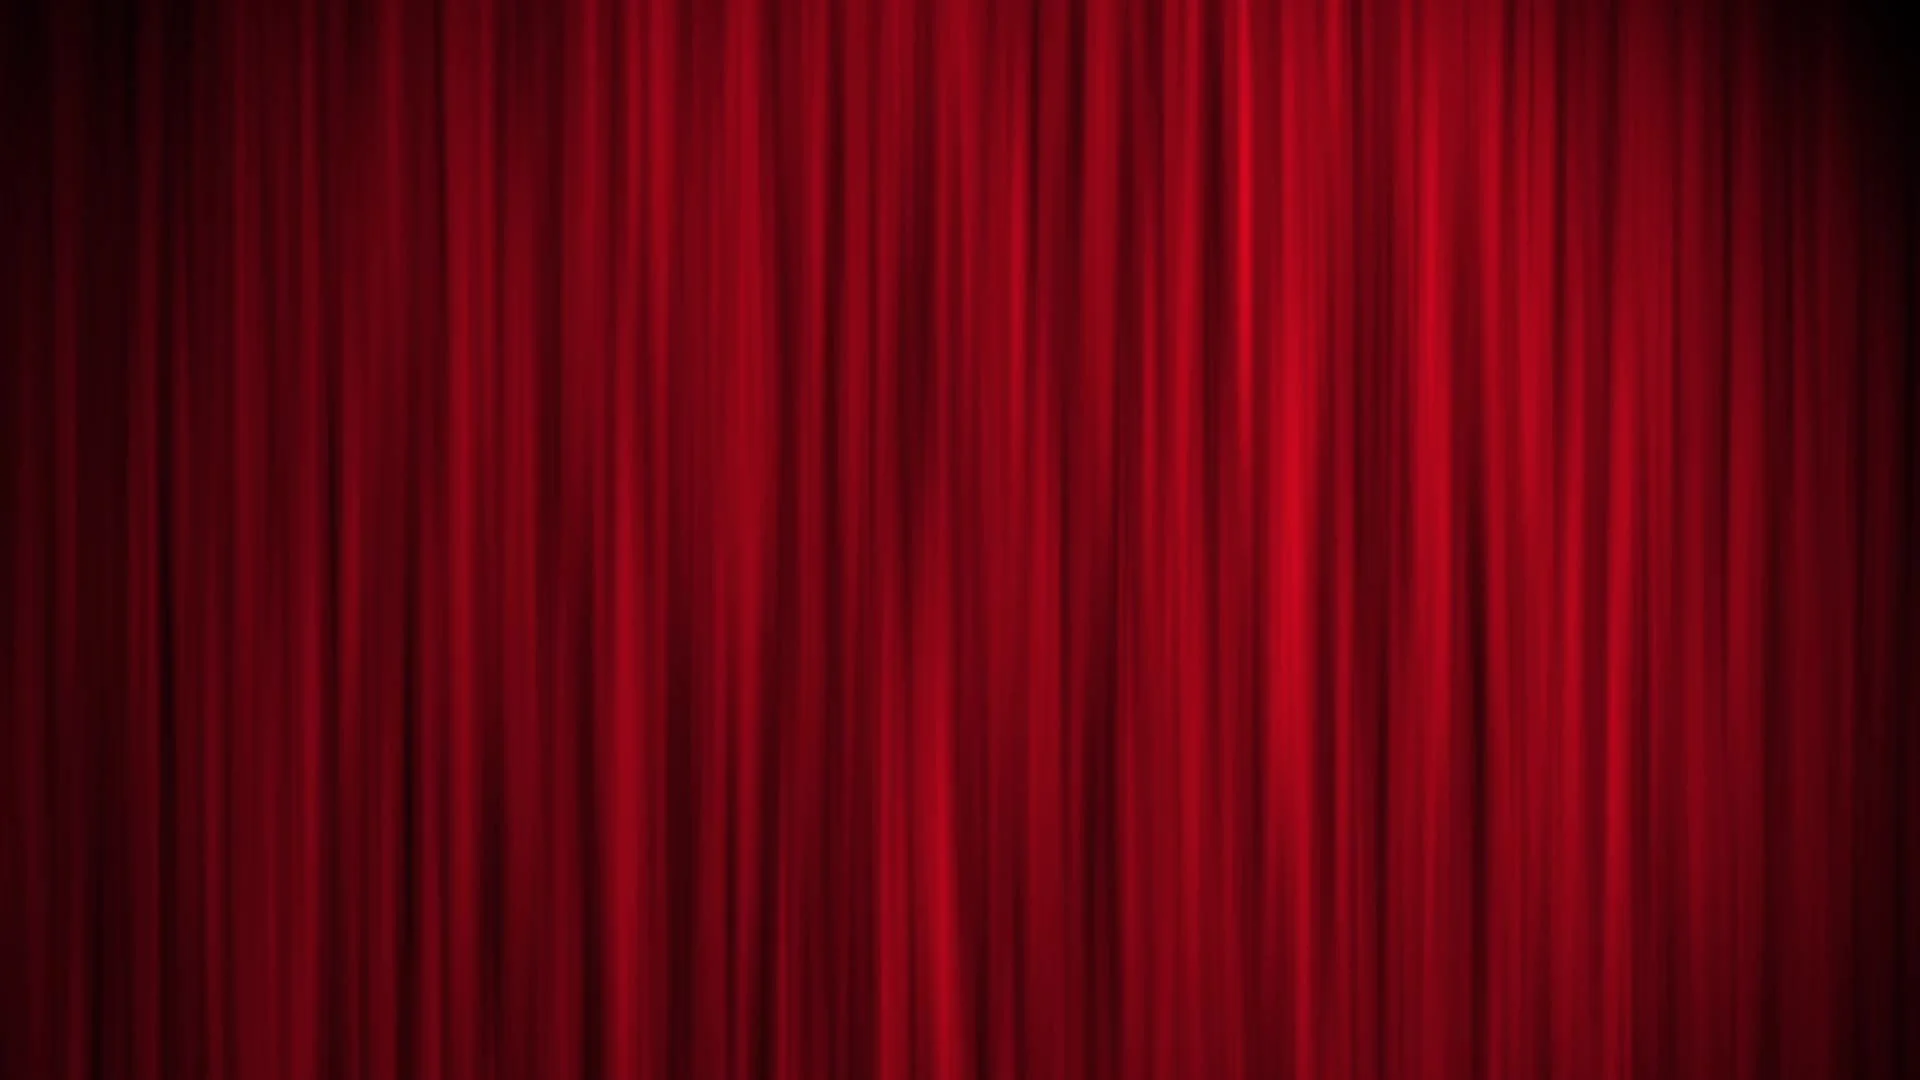 A red curtain like those used in plays